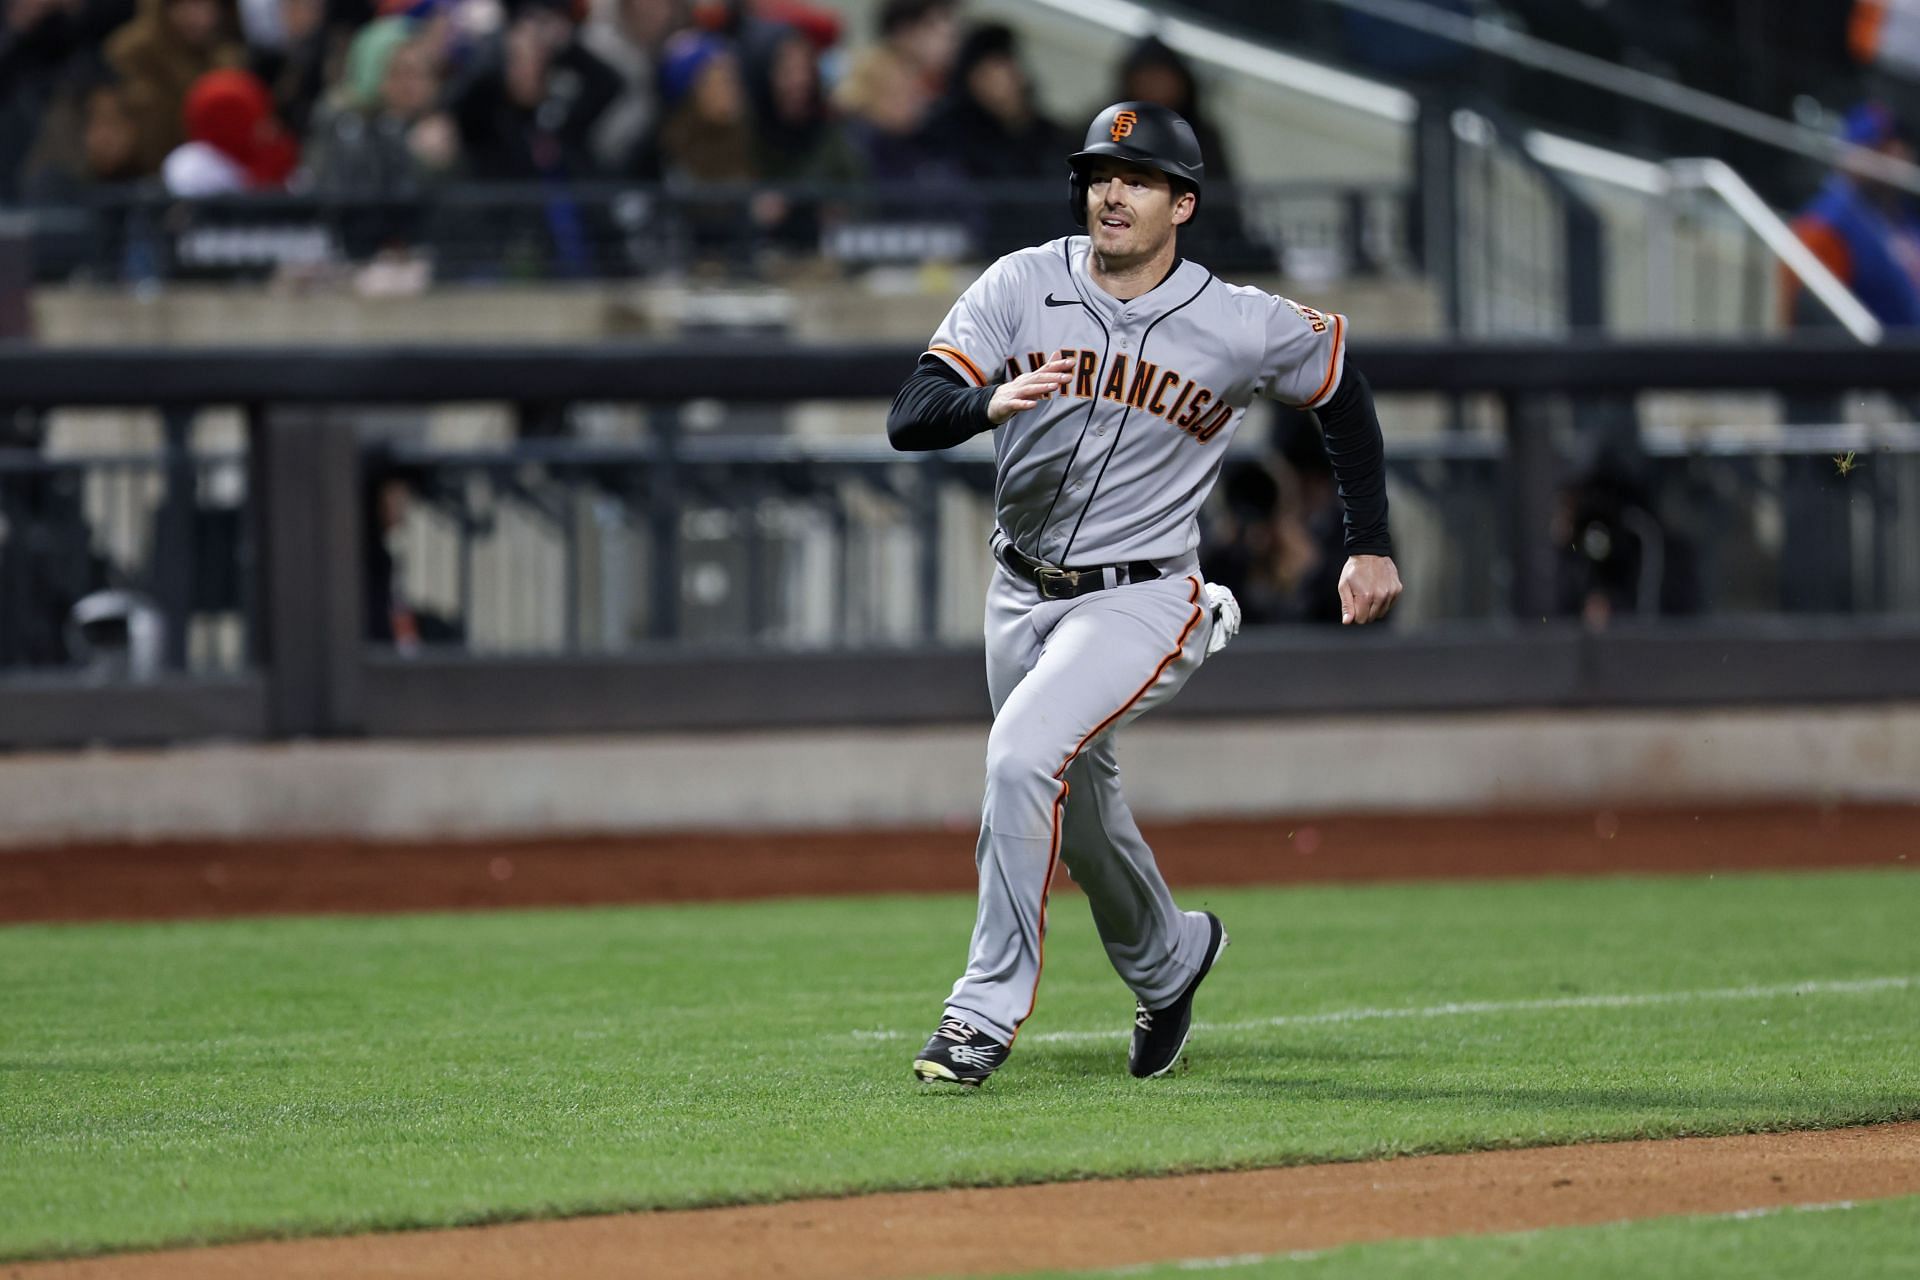 Mike Yastrzemski and the San Francisco Giants will try to get back to their winning ways Wednesday.